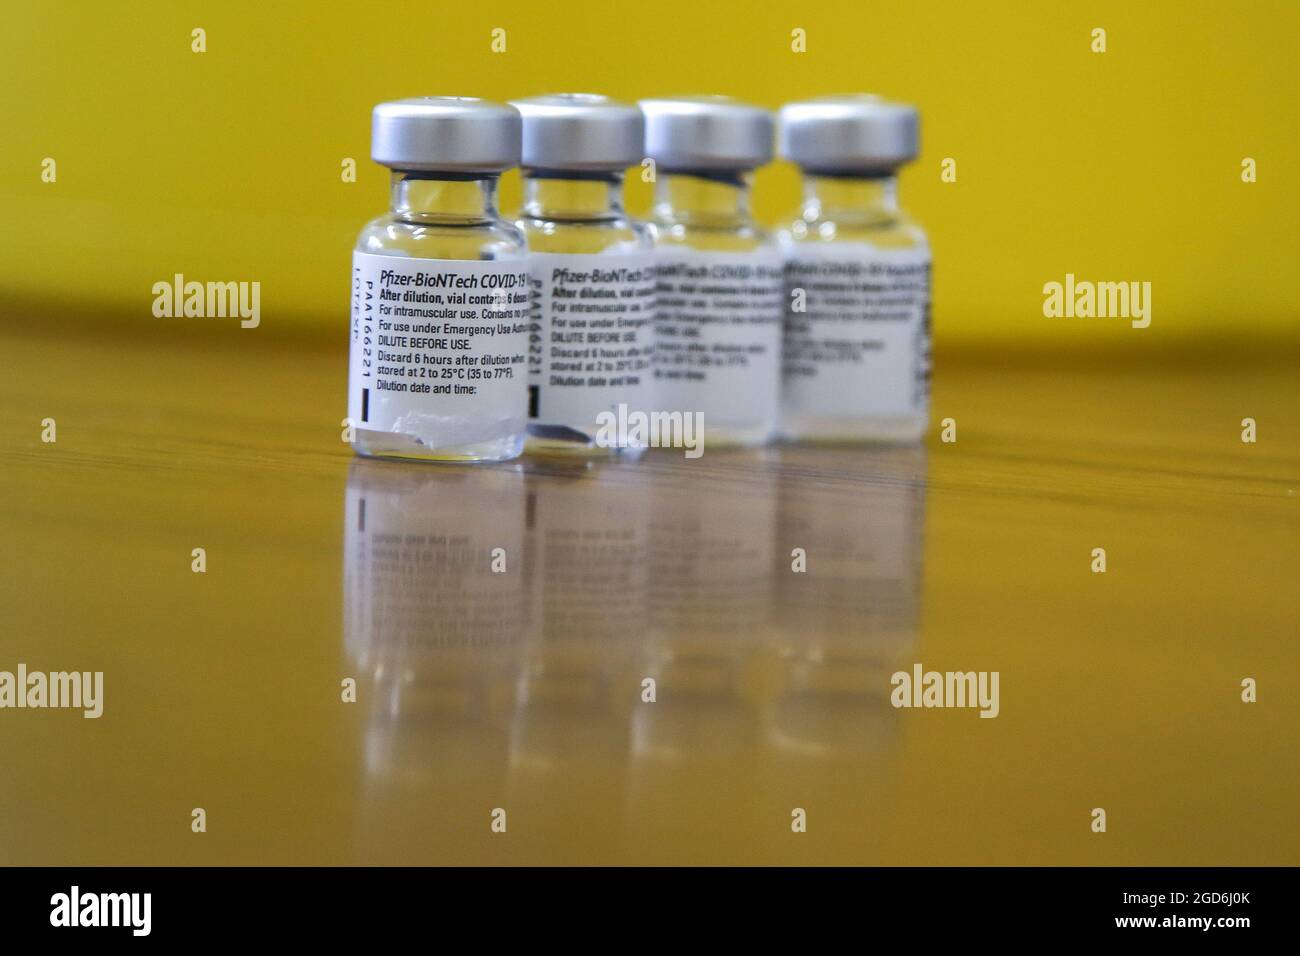 London, UK. 09th Aug, 2021. Reflection of vials containing Pfizer-BioNTech Covid-19 vaccine at a vaccination centre in London. Credit: SOPA Images Limited/Alamy Live News Stock Photo